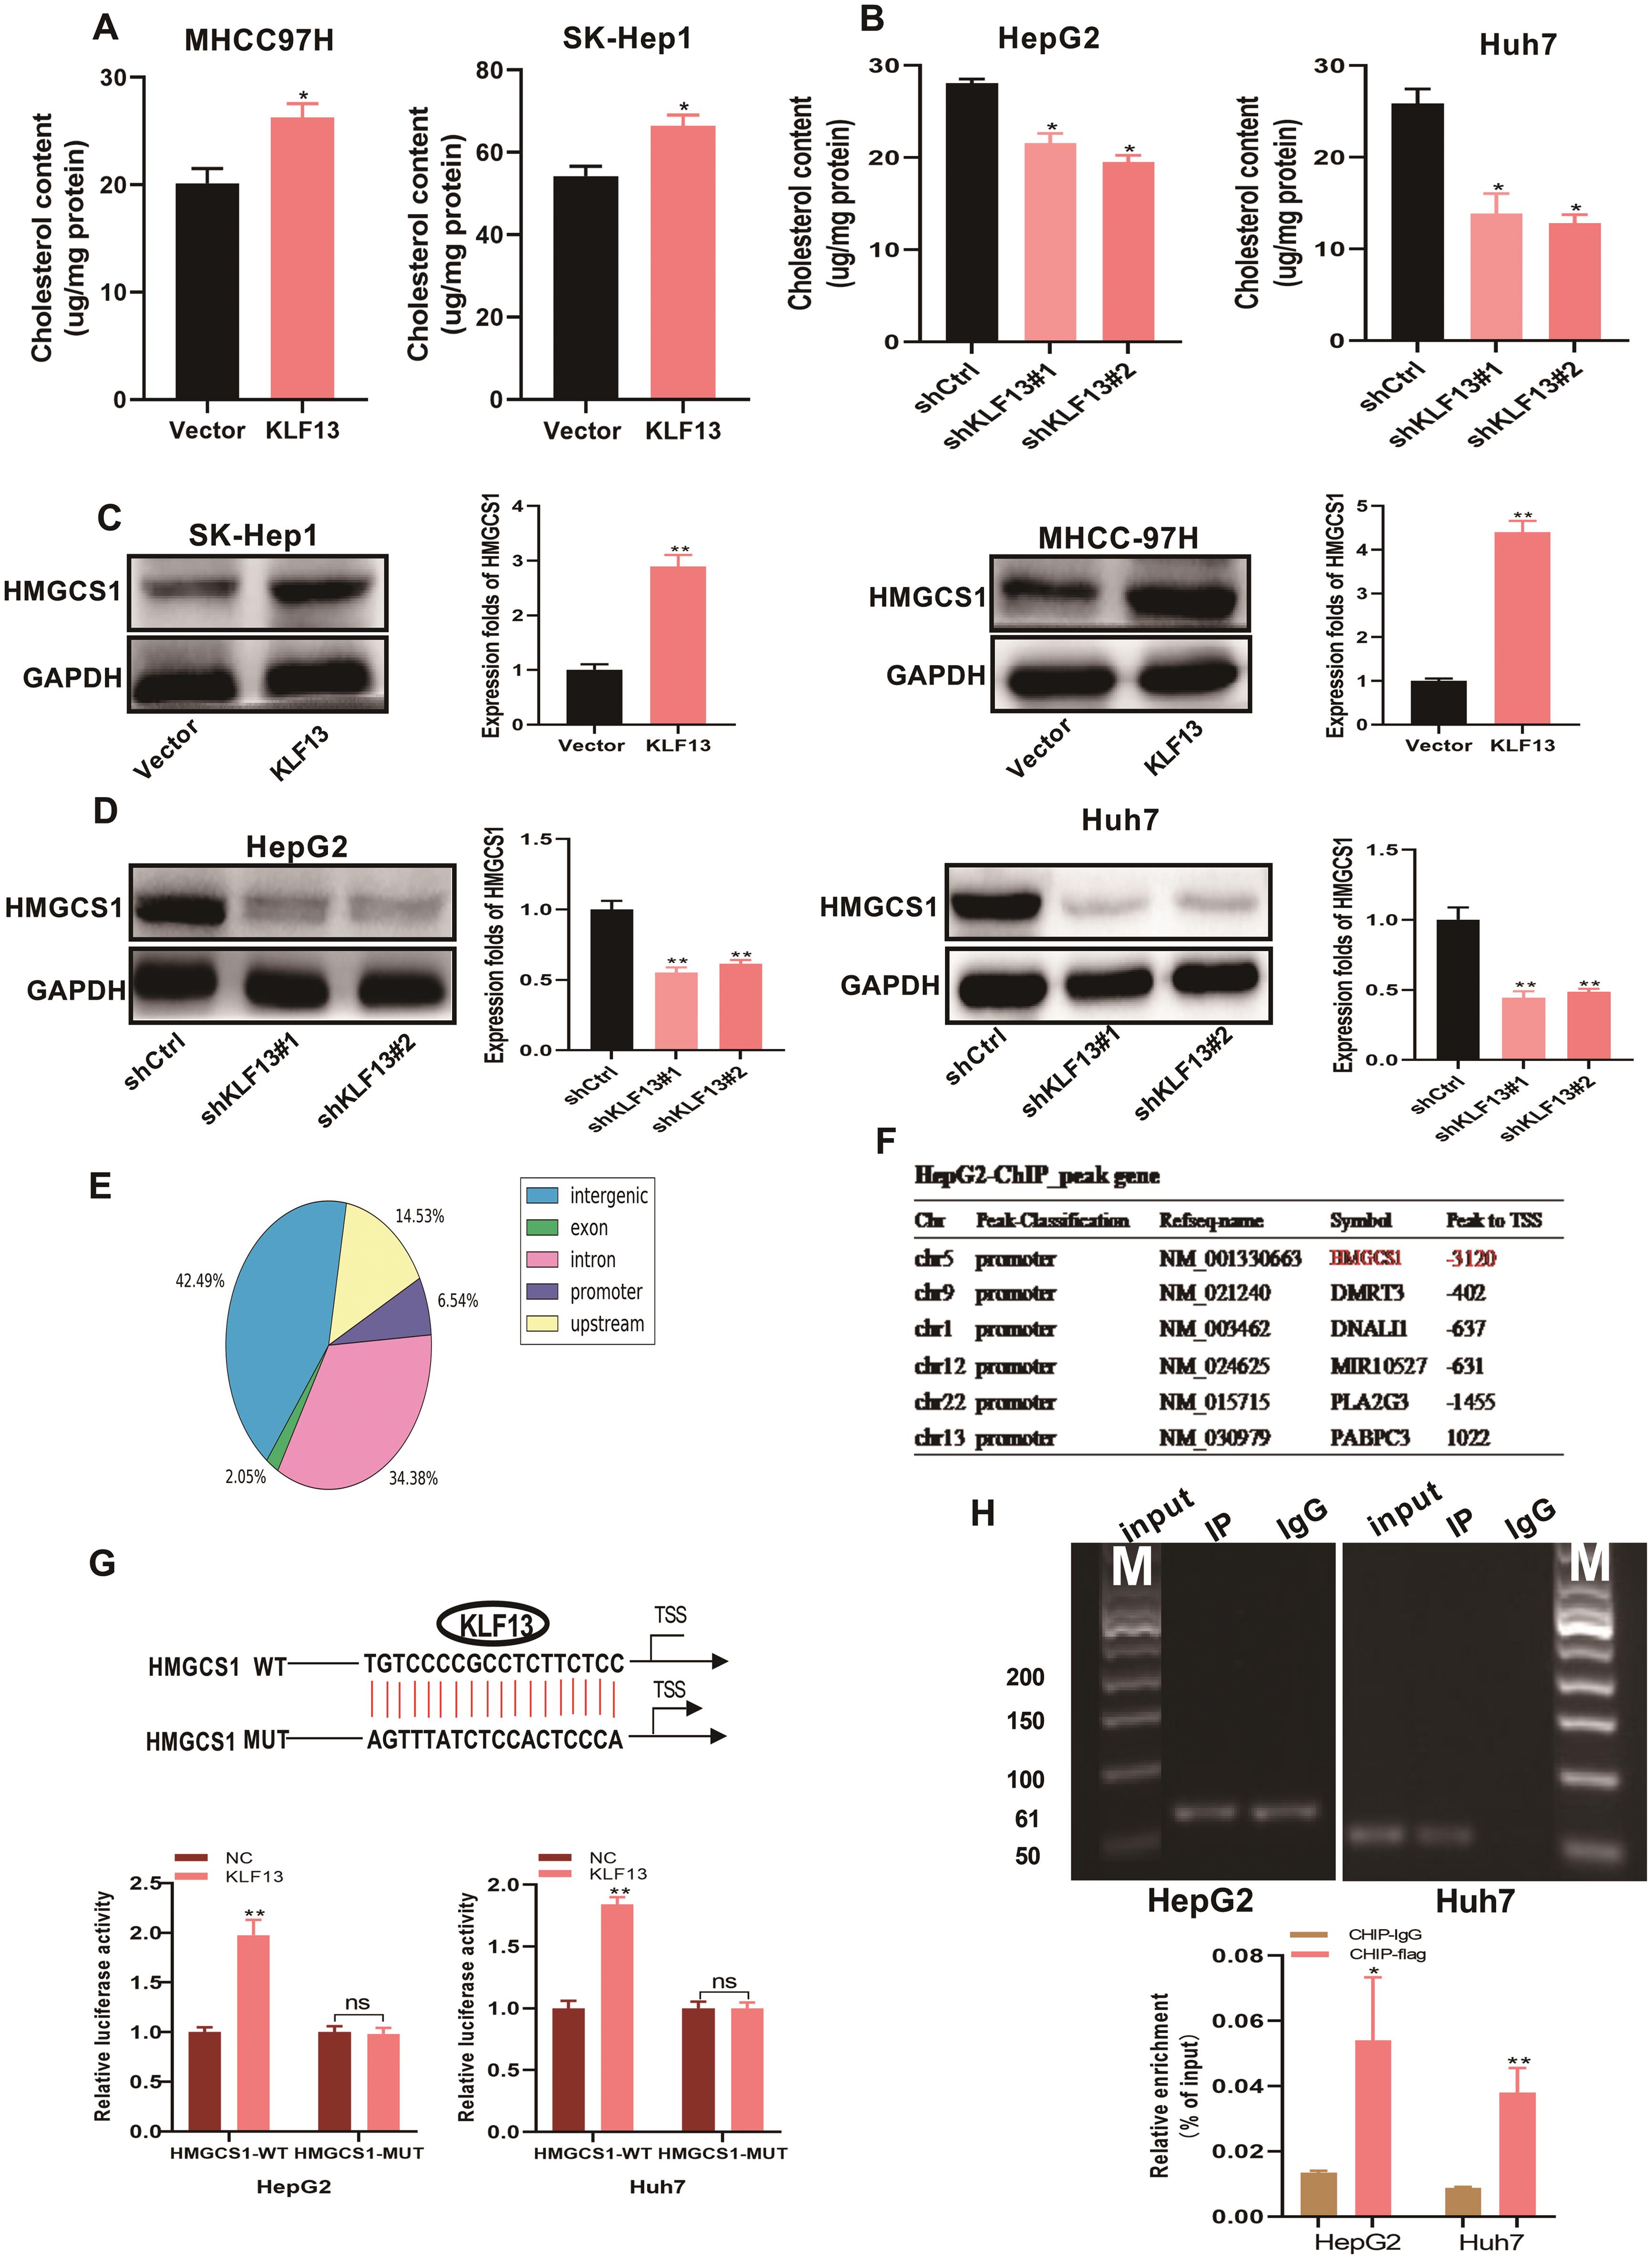 KLF13 increases cholesterol biosynthesis and transcriptionally promotes HMGCS1.